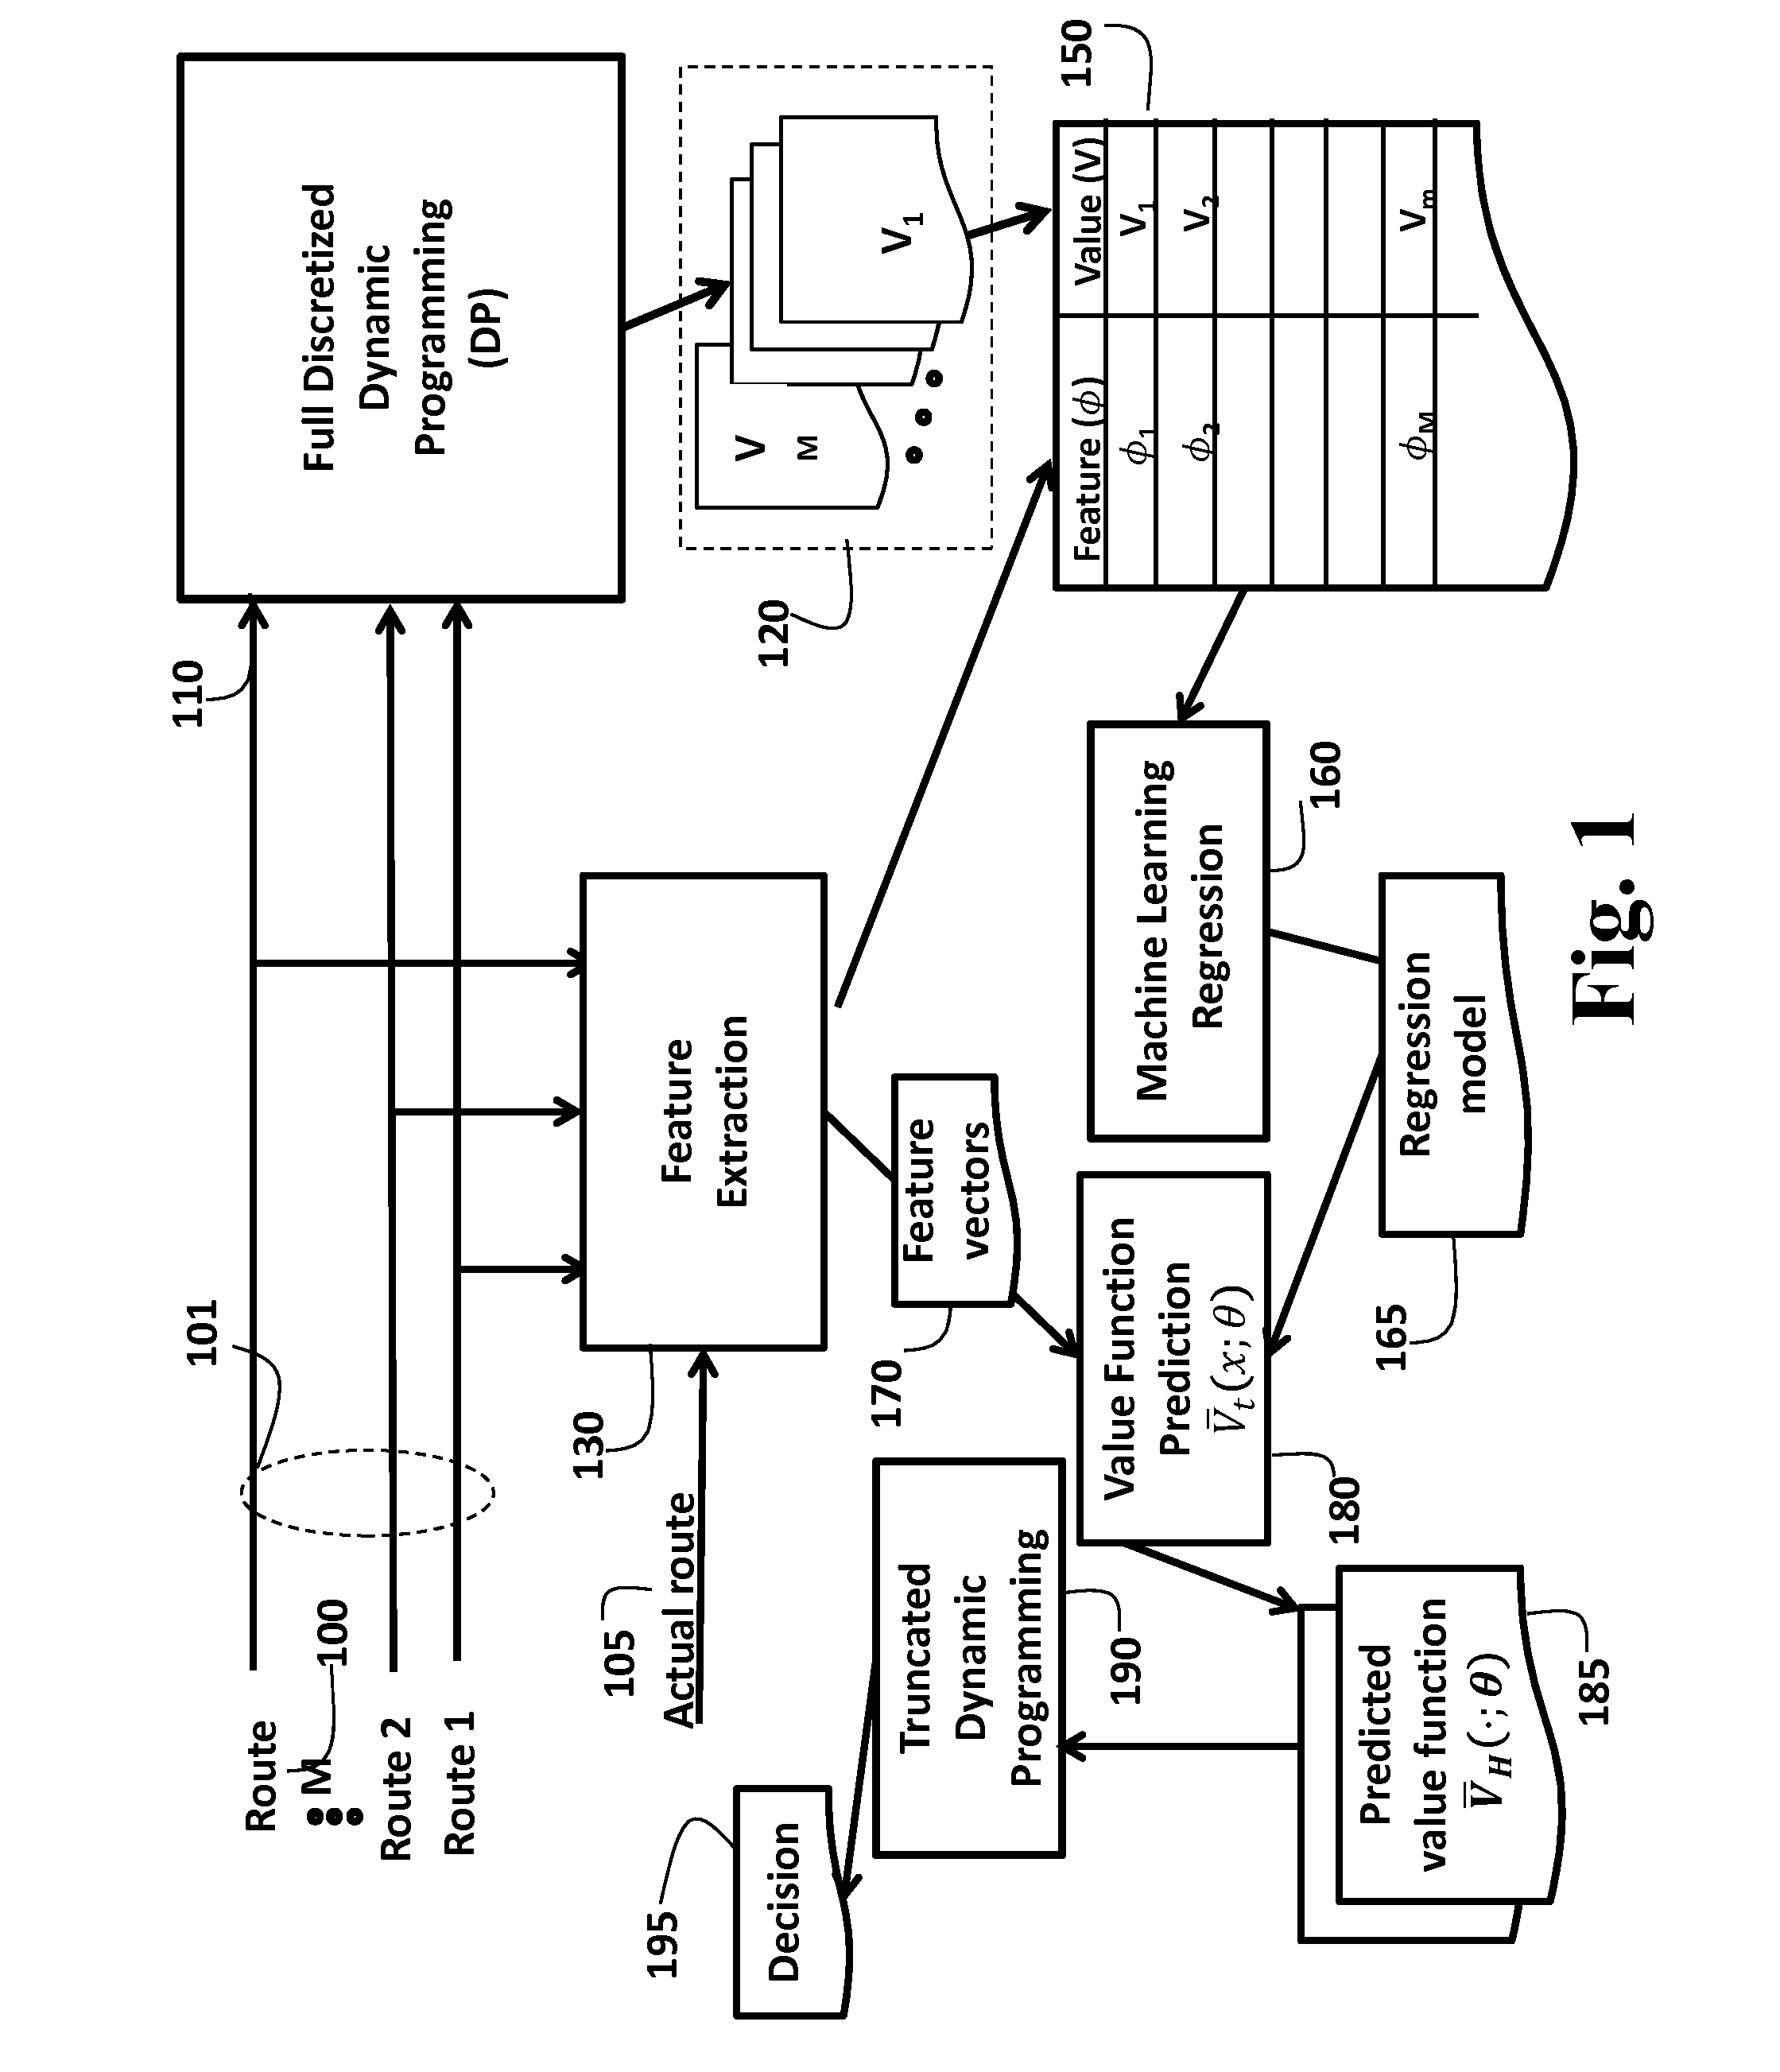 Method and System for Selecting Power Sources in Hybrid Electric Vehicles